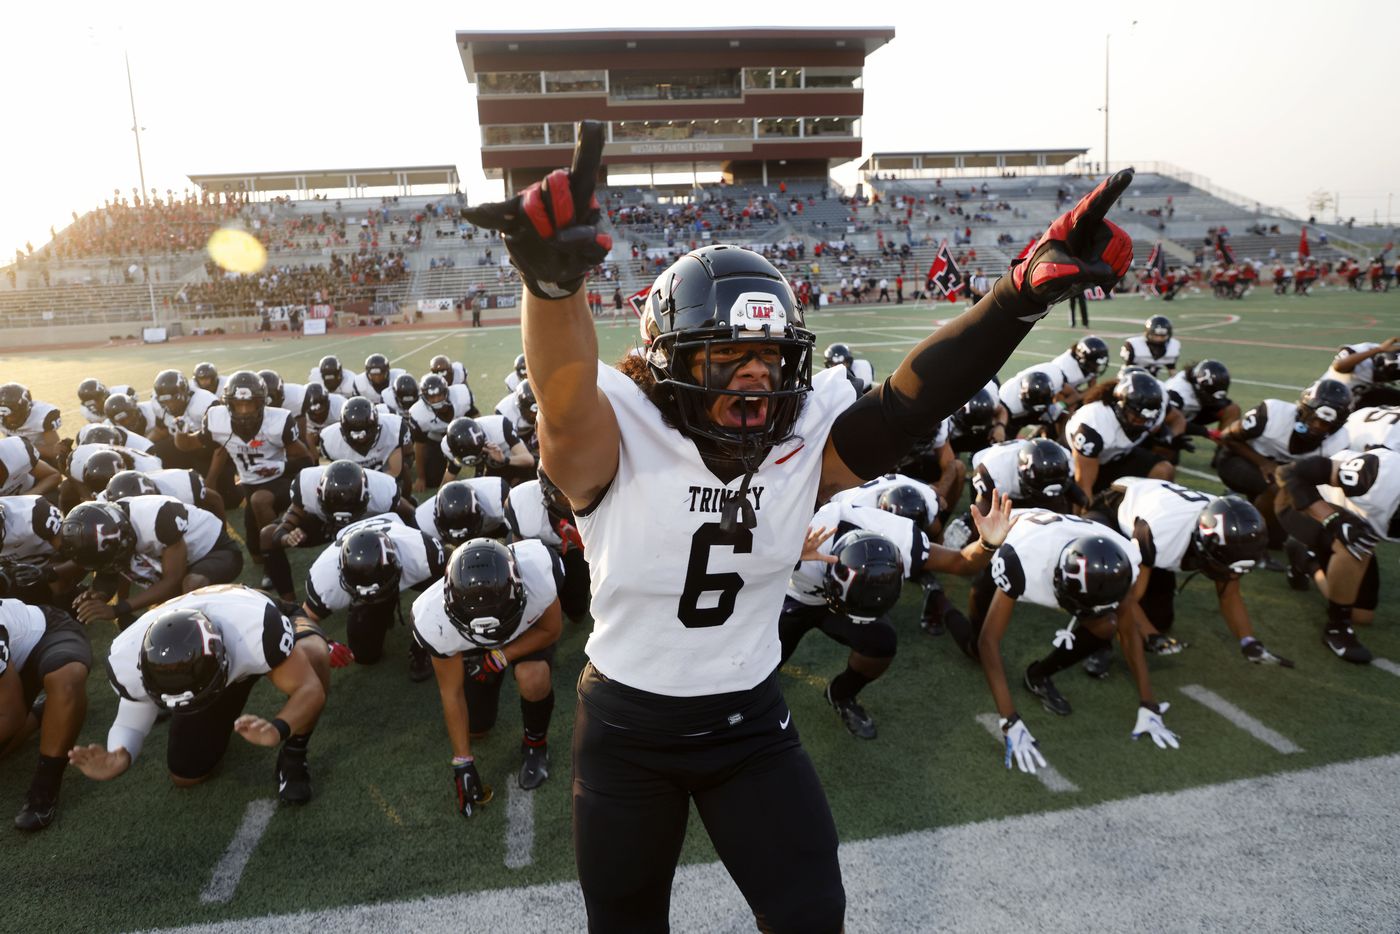 Euless Trinity linebacker Nai Mose (6) leads the team in the Sipi Tau prior to playing Colleyville Heritage during a high school football game in Grapevine, Texas on Friday, Sept. 10, 2021. (Michael Ainsworth/Special Contributor)